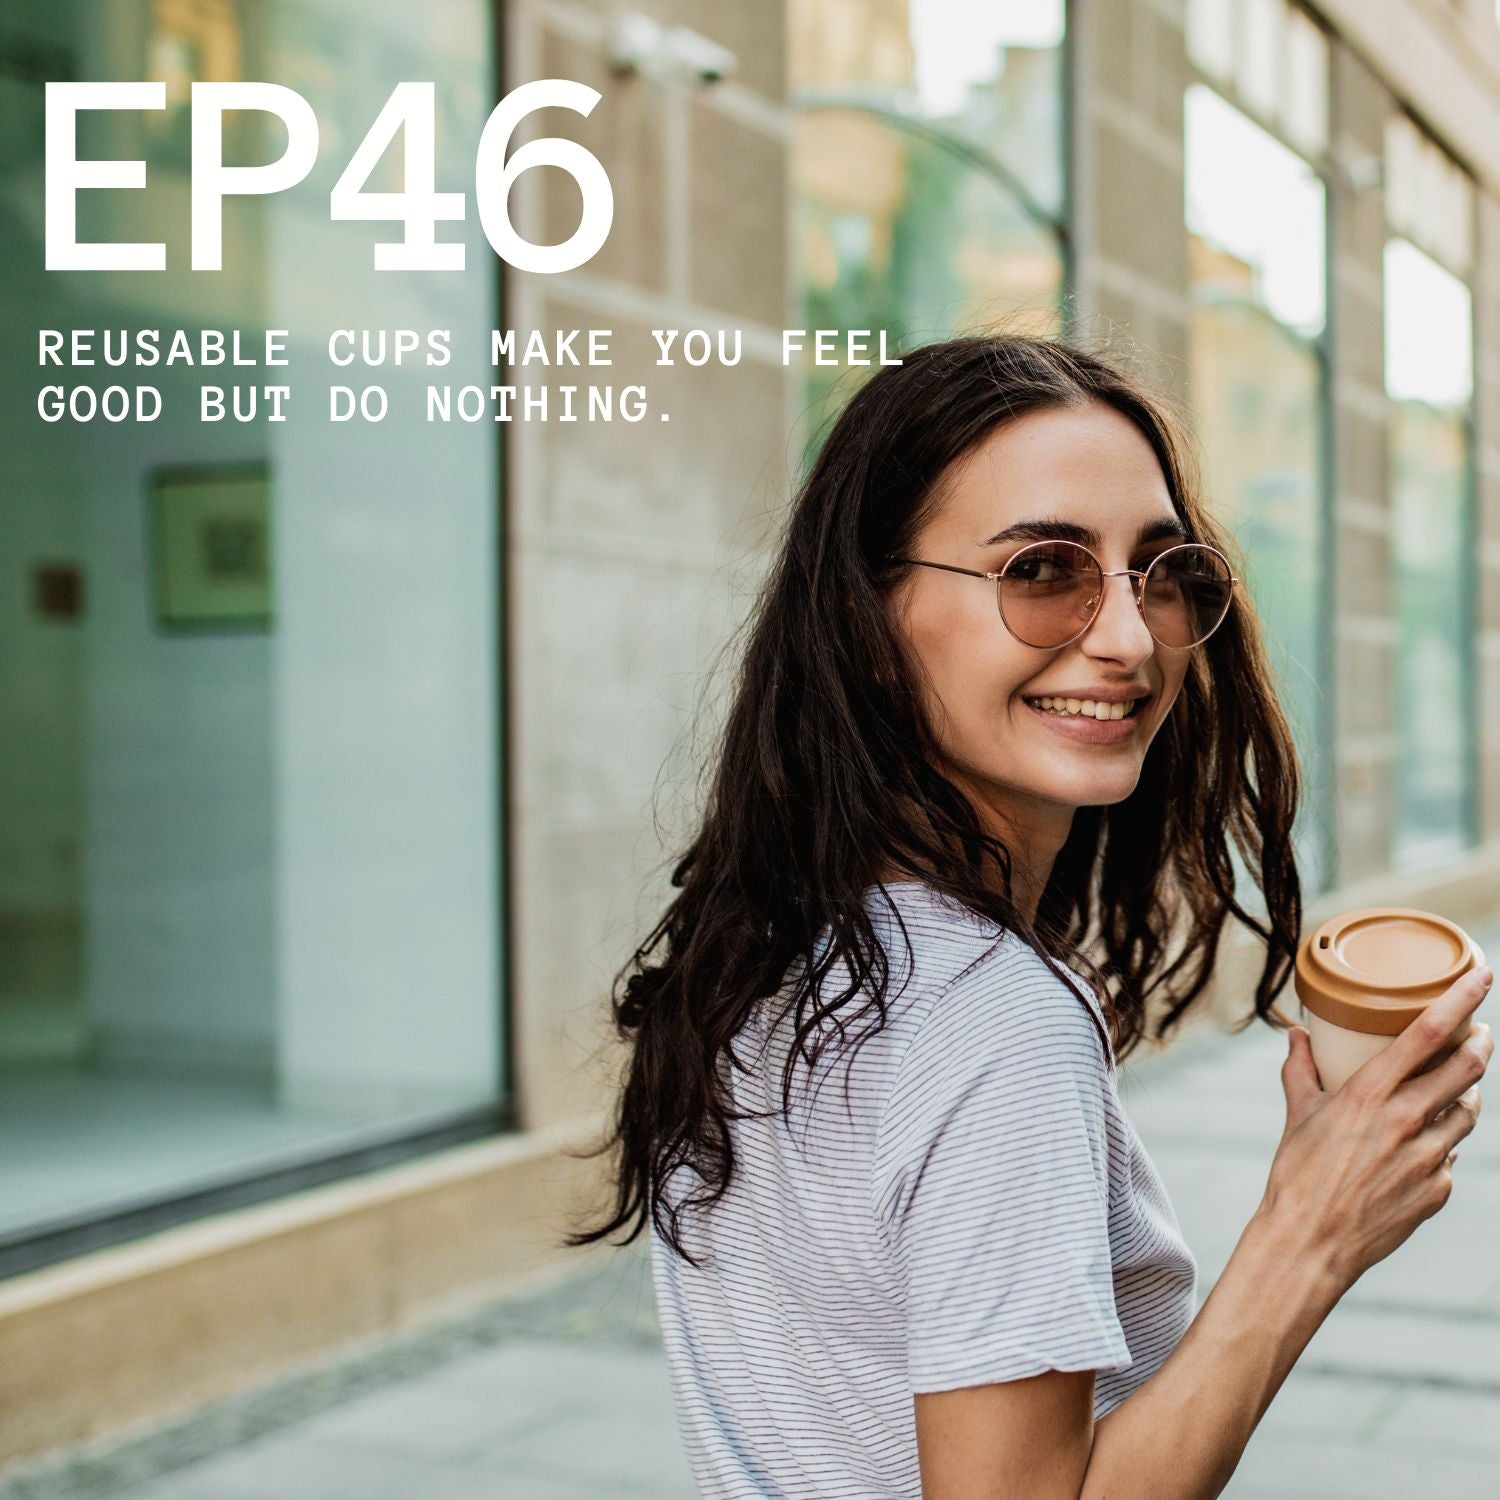 Episode 46 - Reusable Cups Make You Feel Good But Do Nothing